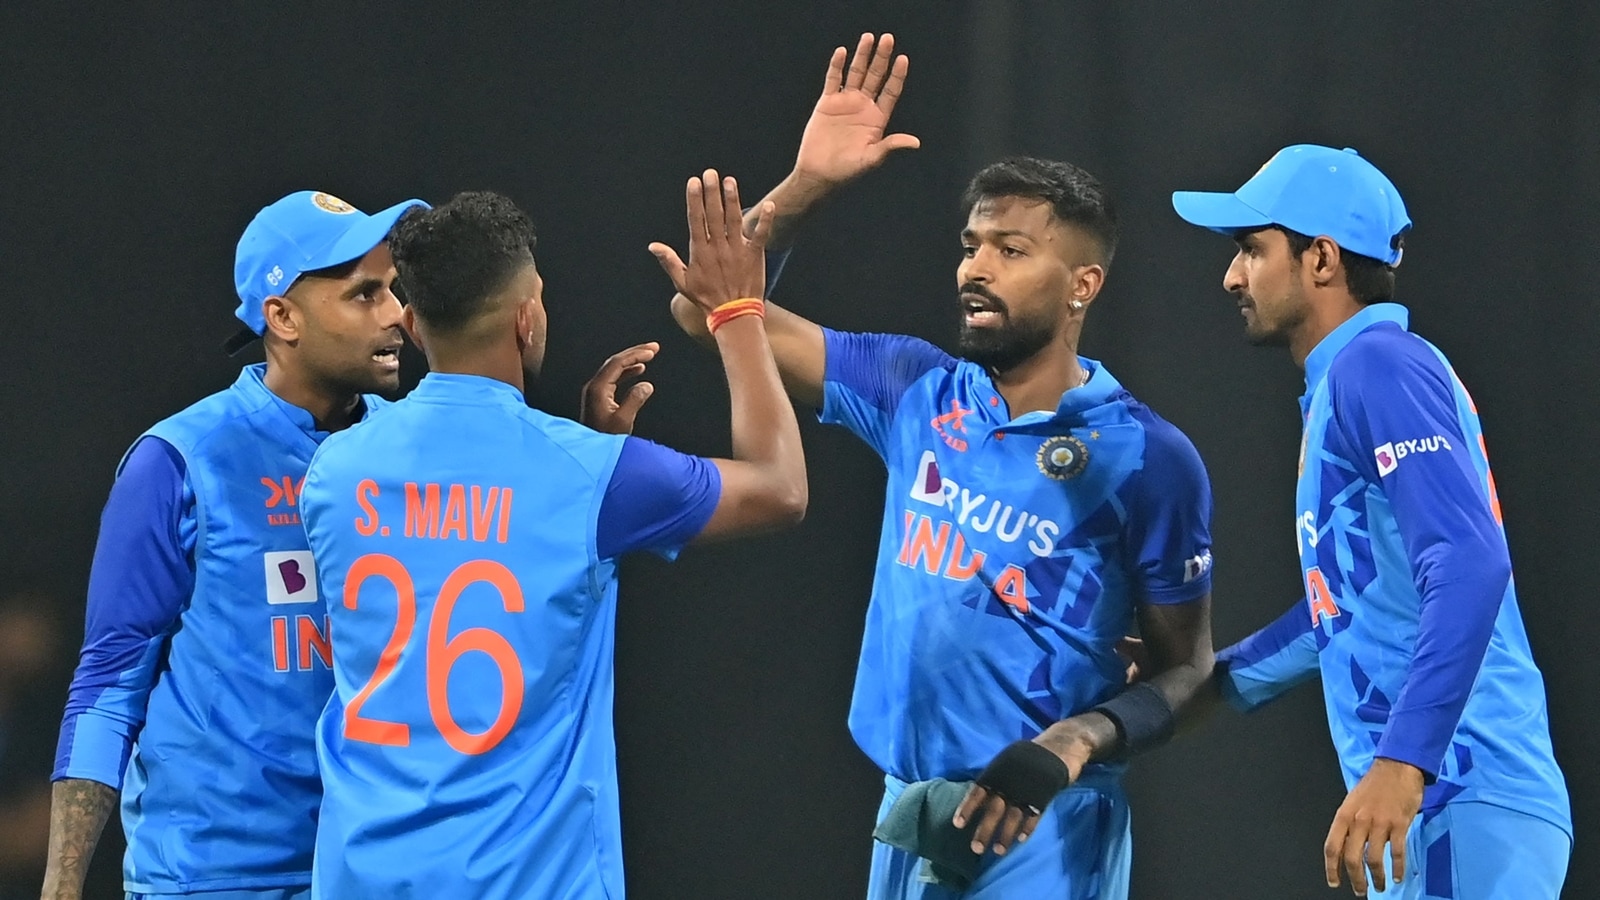 India vs Sri Lanka 2nd T20I Live Streaming When and Where to watch IND vs SL Cricket